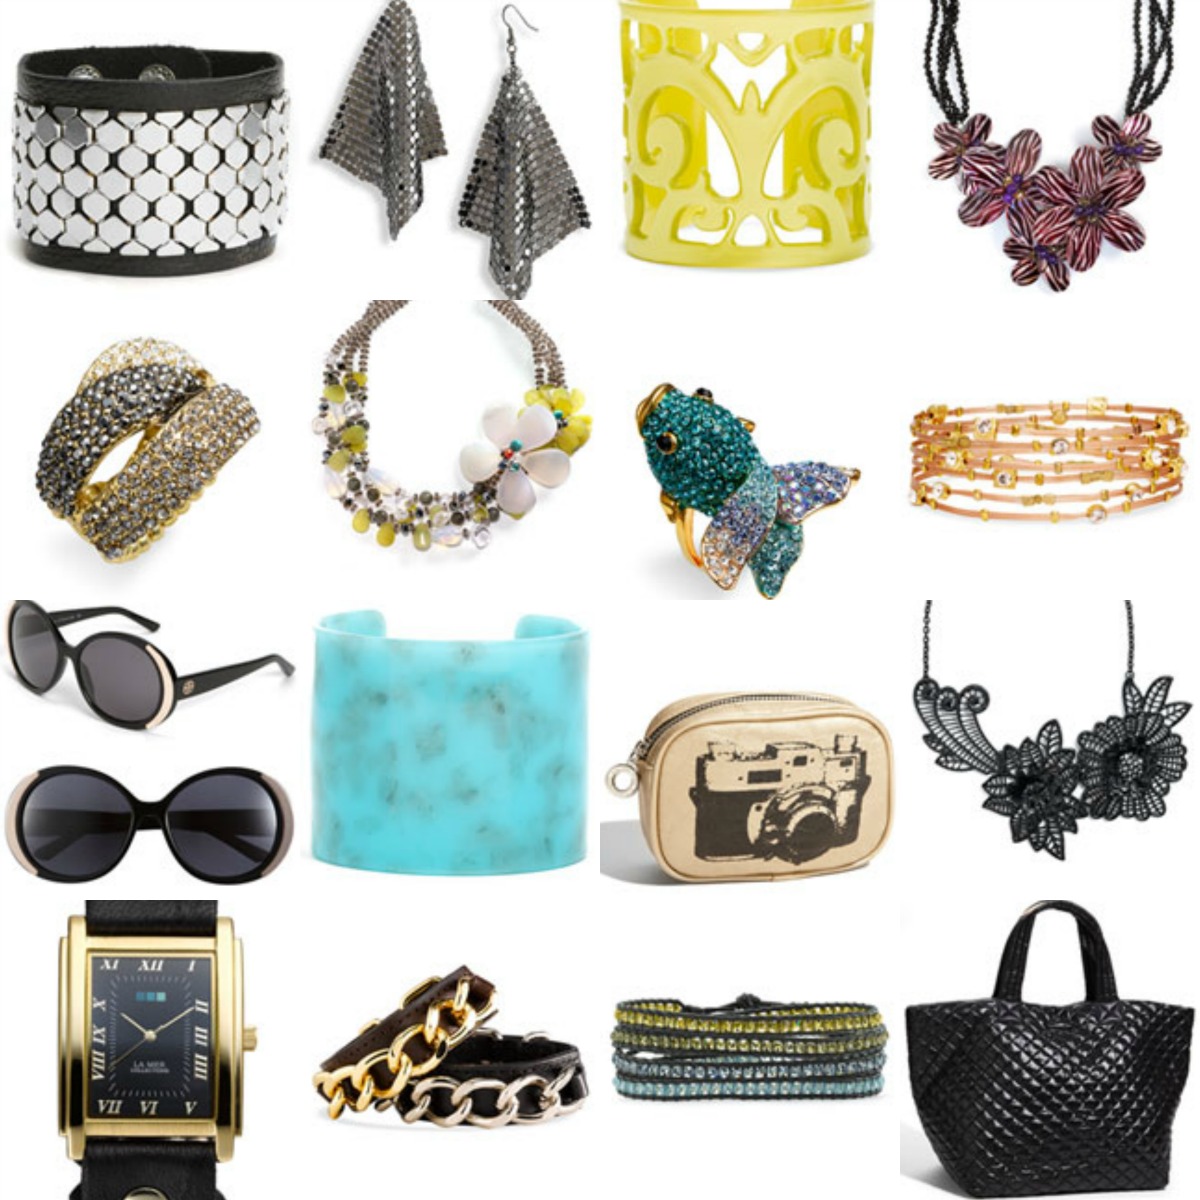 List Of 10 Chic Accessories